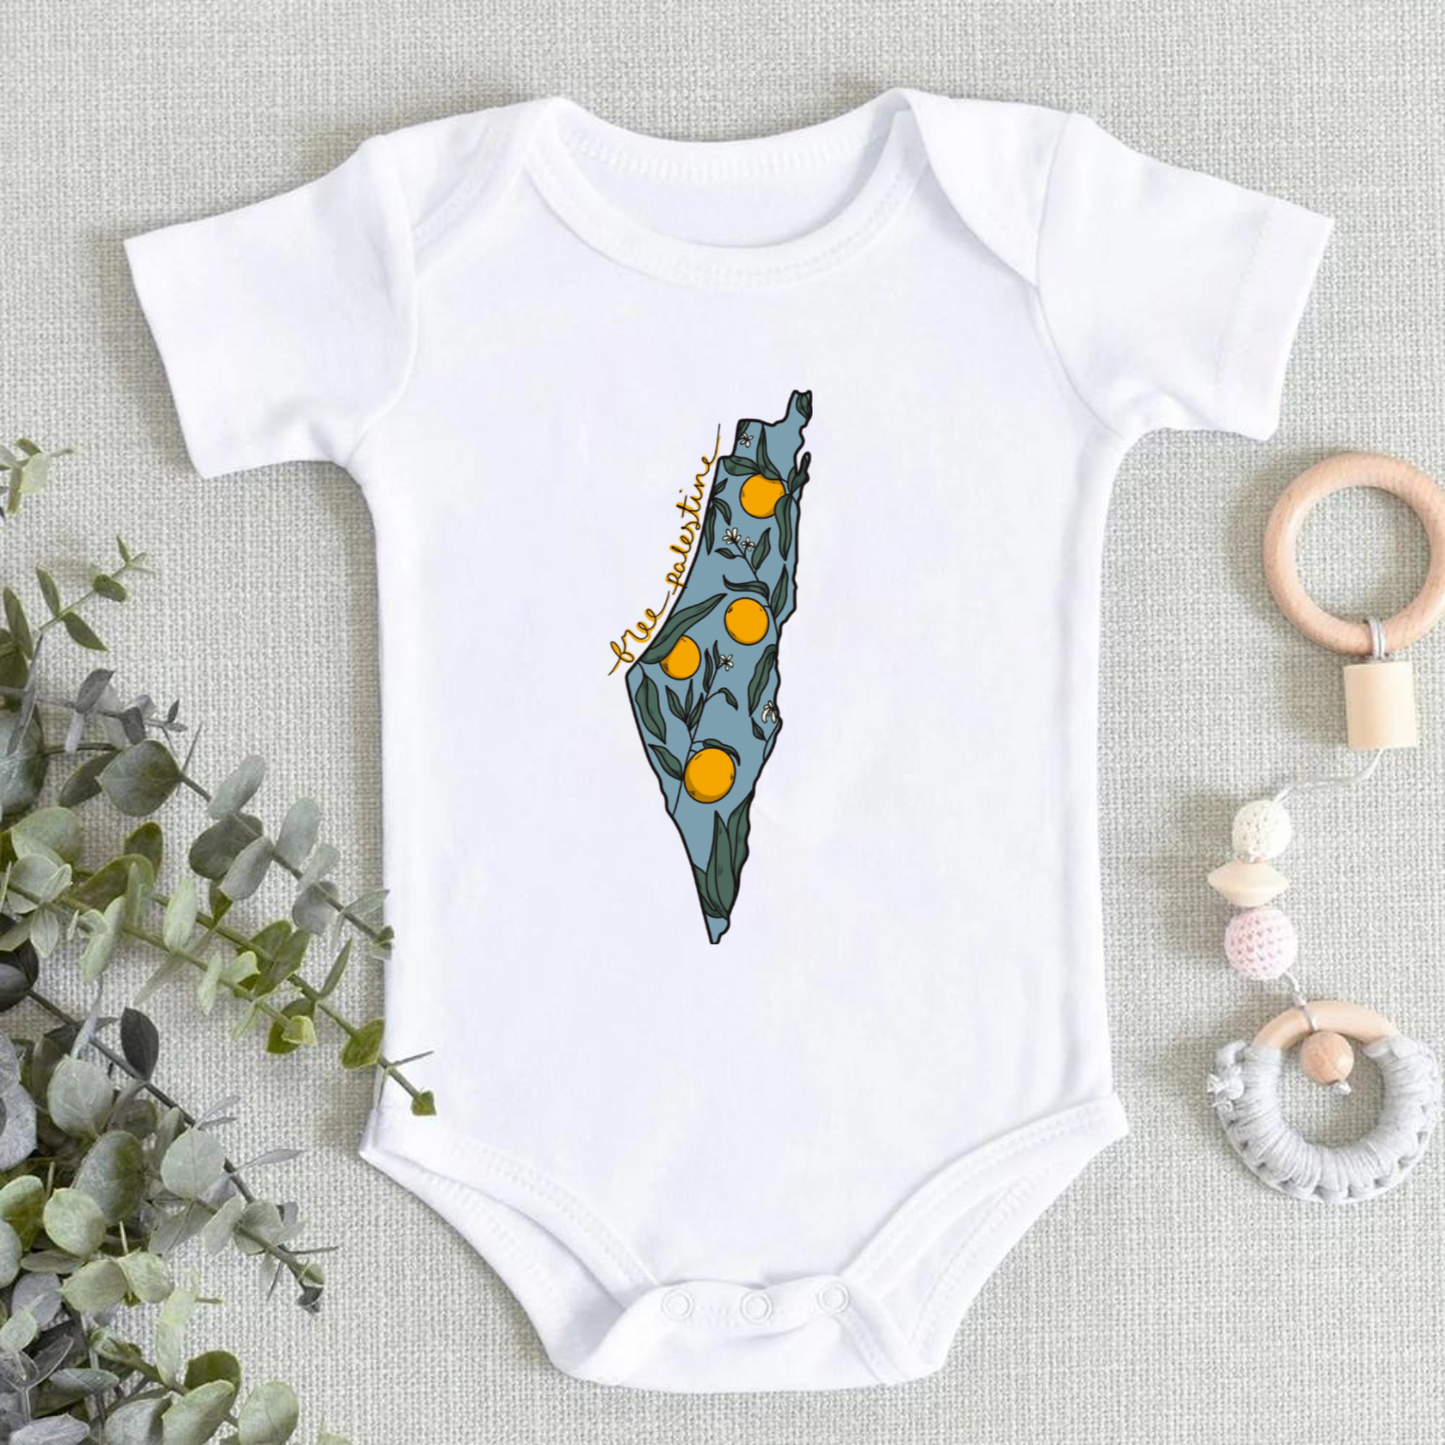 Free Palestine Romper For Babies 0-24 months